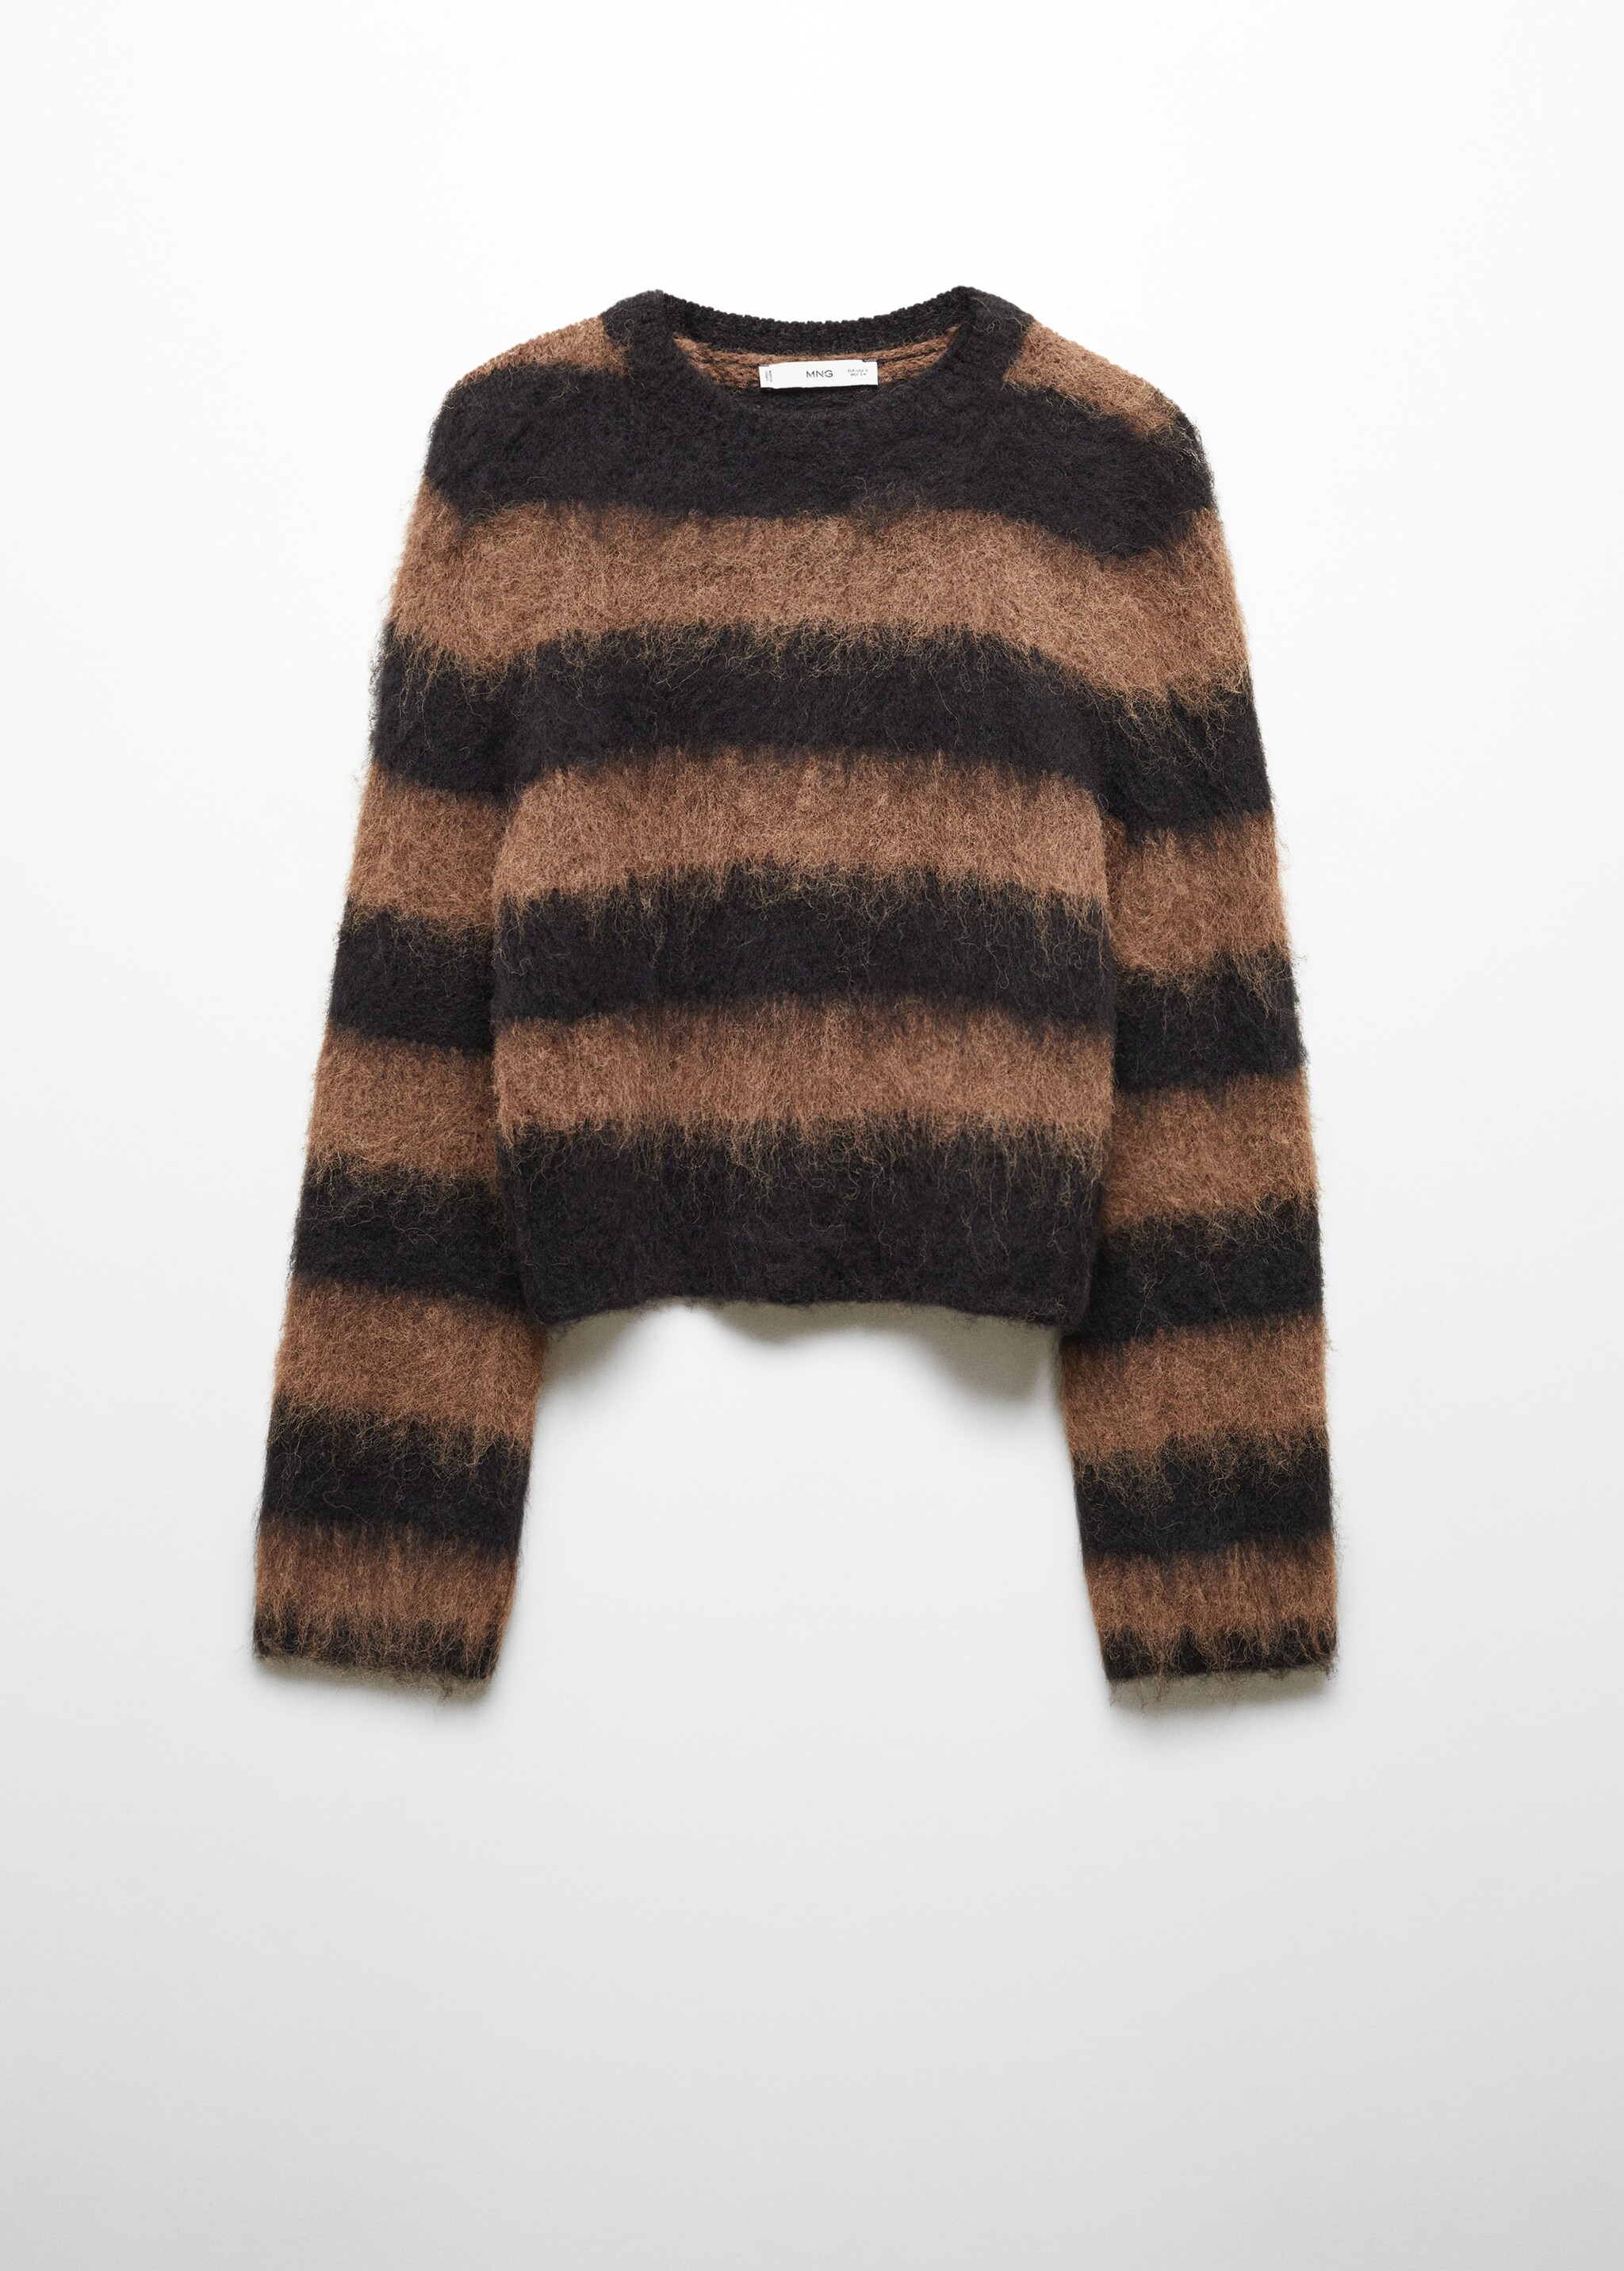 Faux fur knit sweater - Article without model